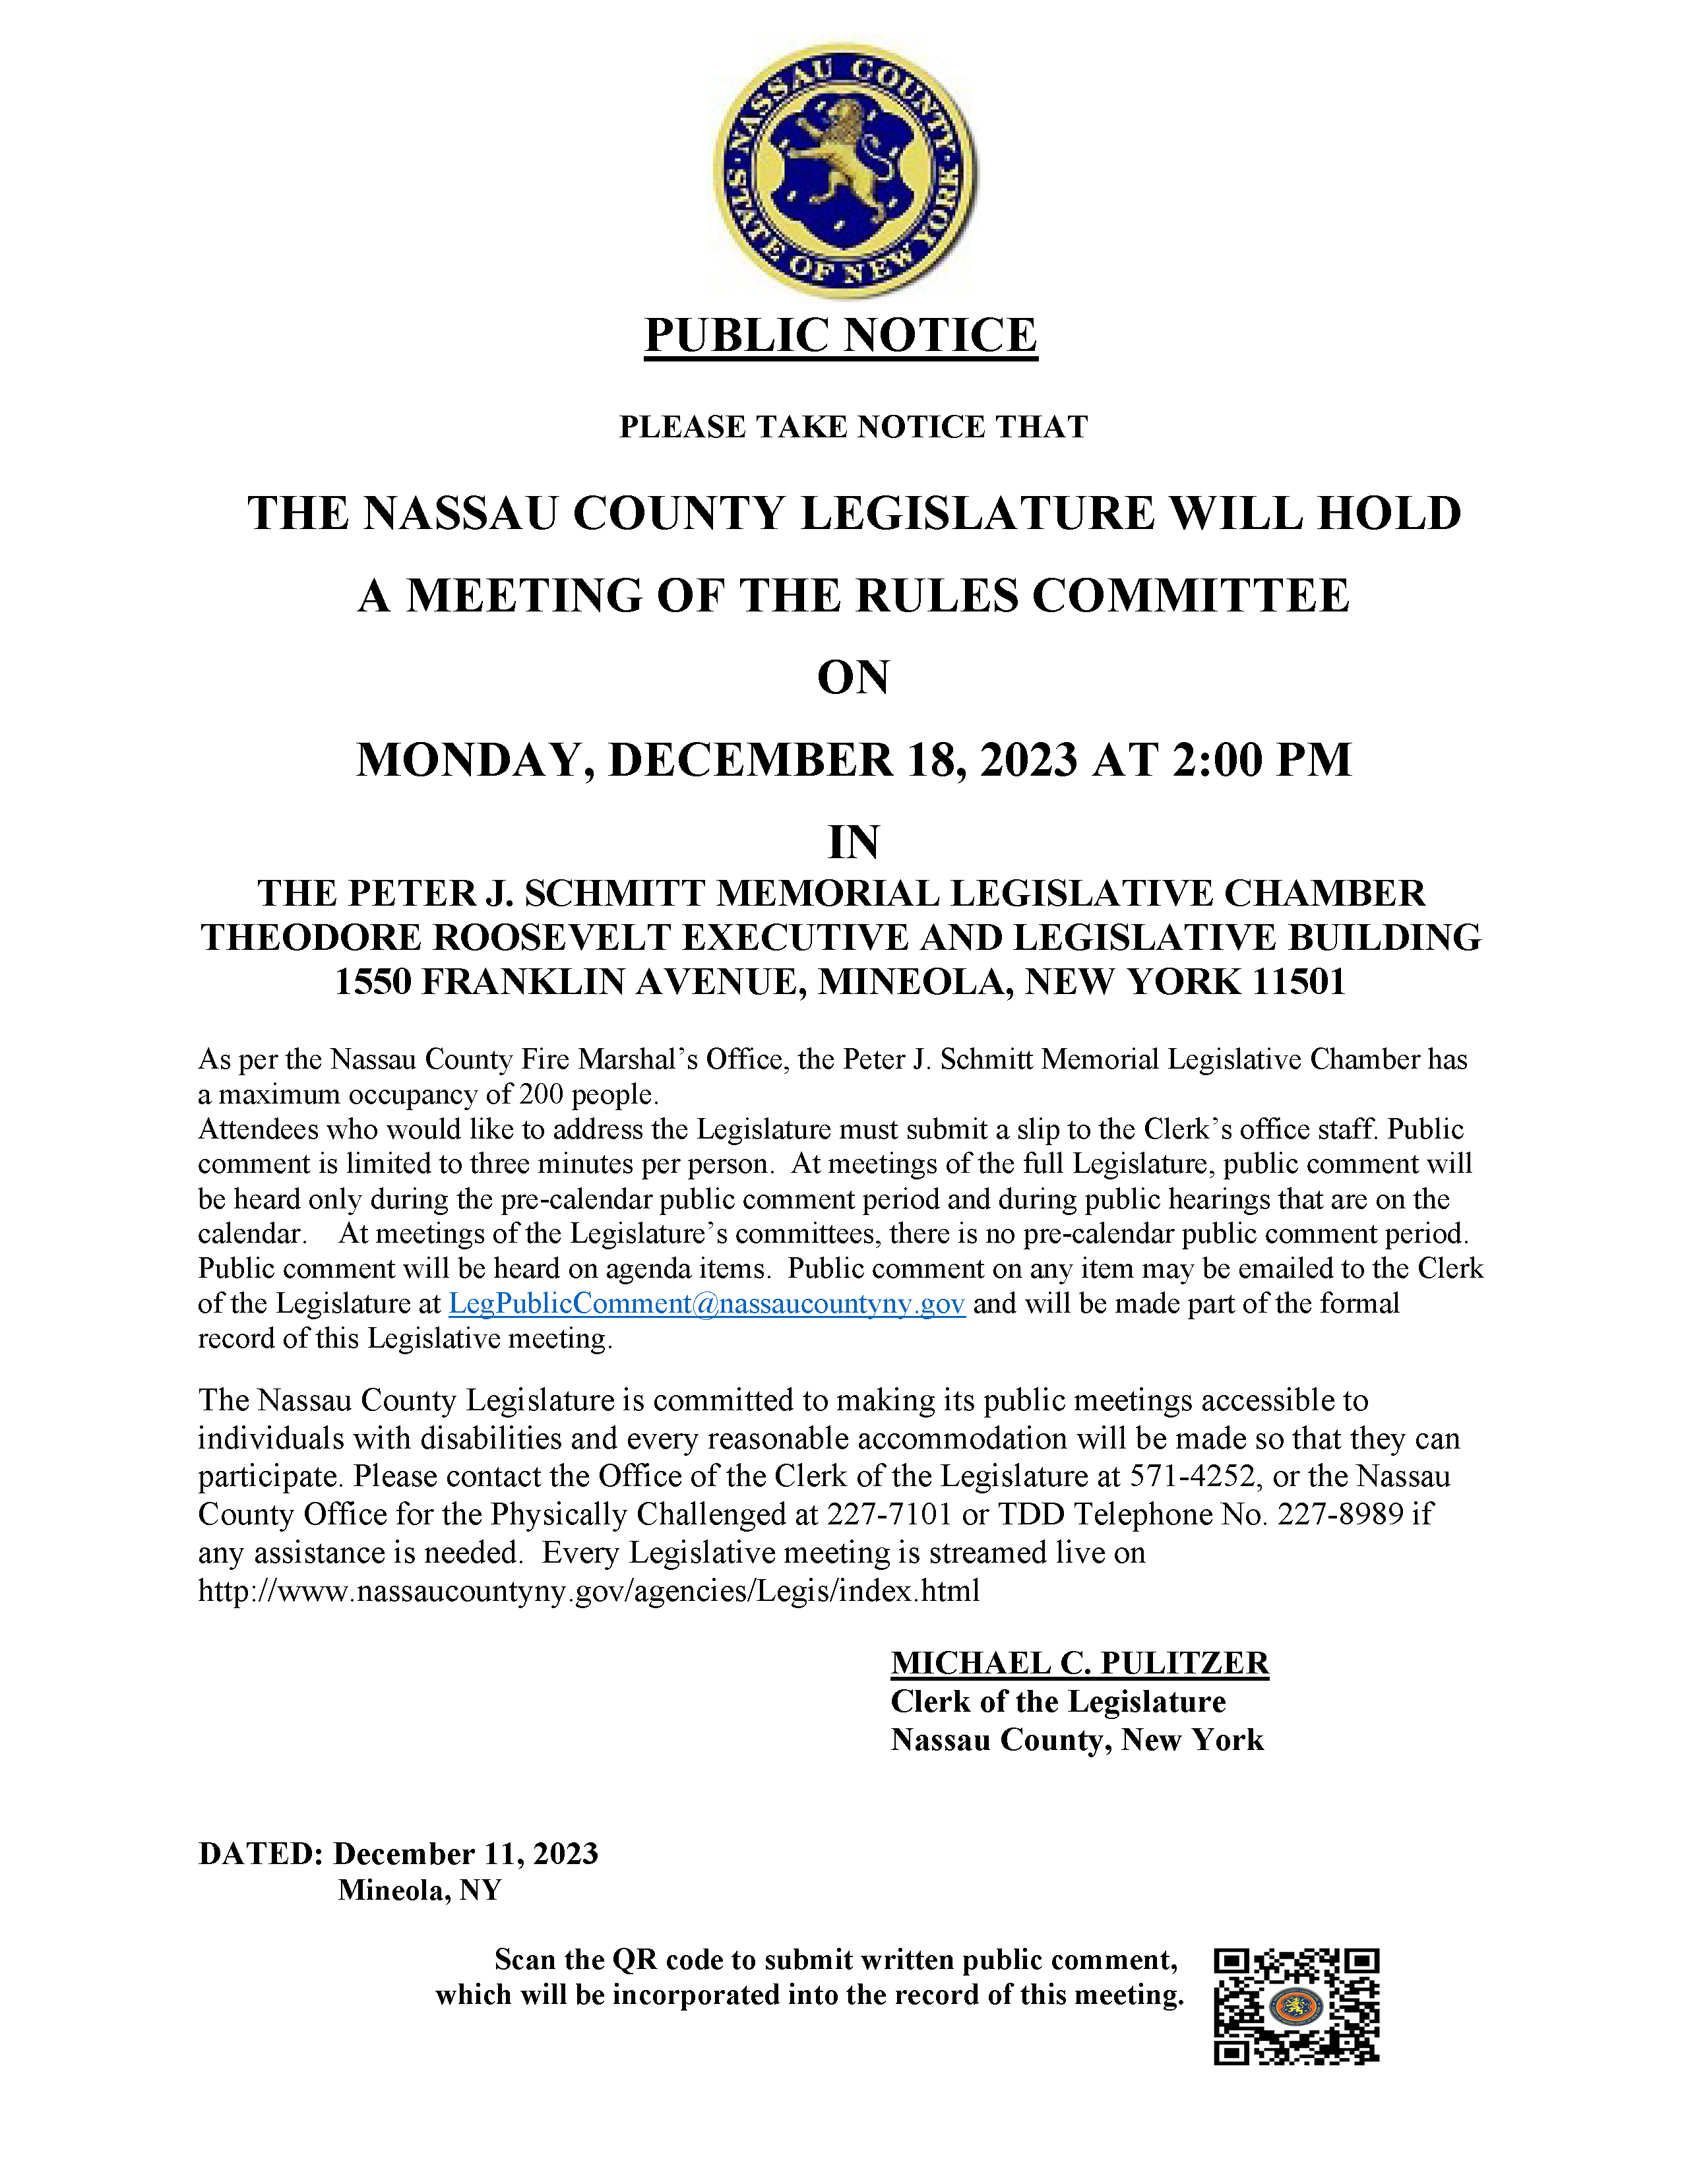 The County Legislature will hold a meeting of the rules committee on Monday, 12-18-23 at 2PM Opens in new window